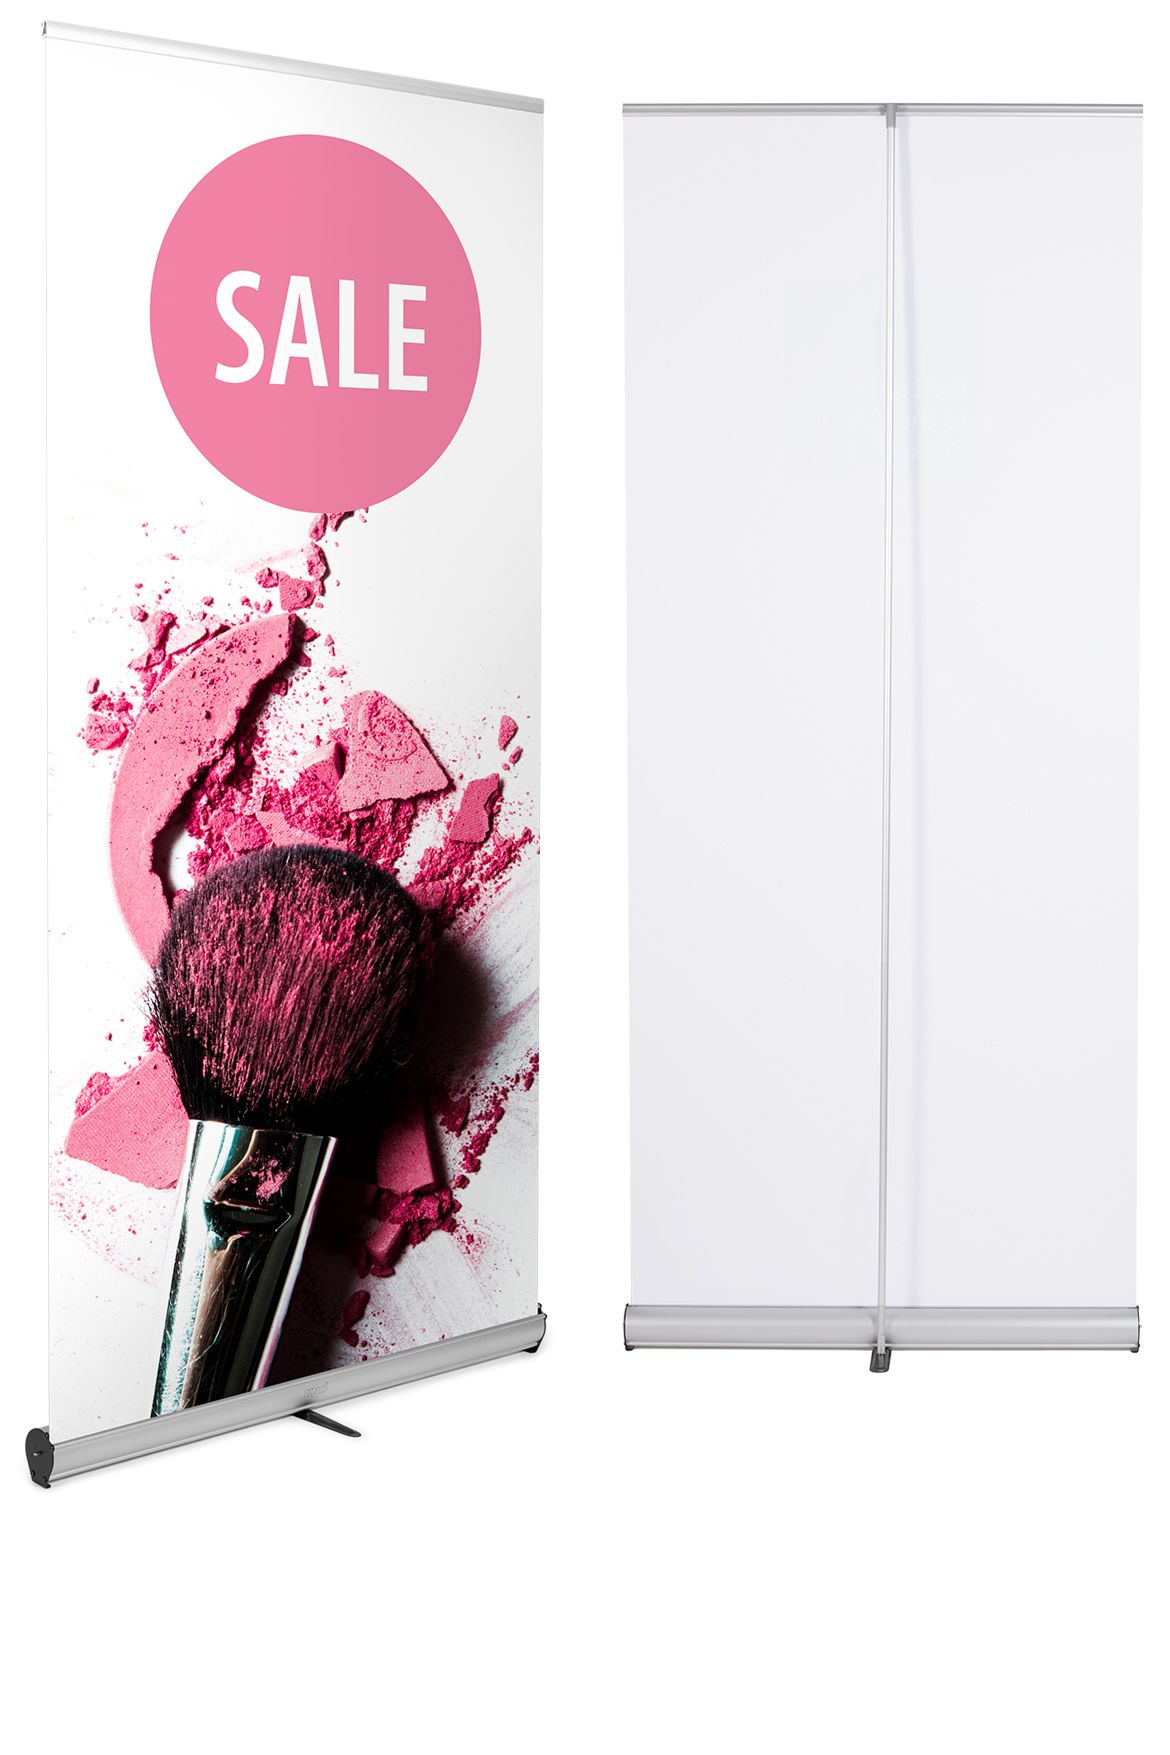 Details about   EXPAND MEDIA QuickScreen Retractable Display Roll Up Banner with Travel Case 